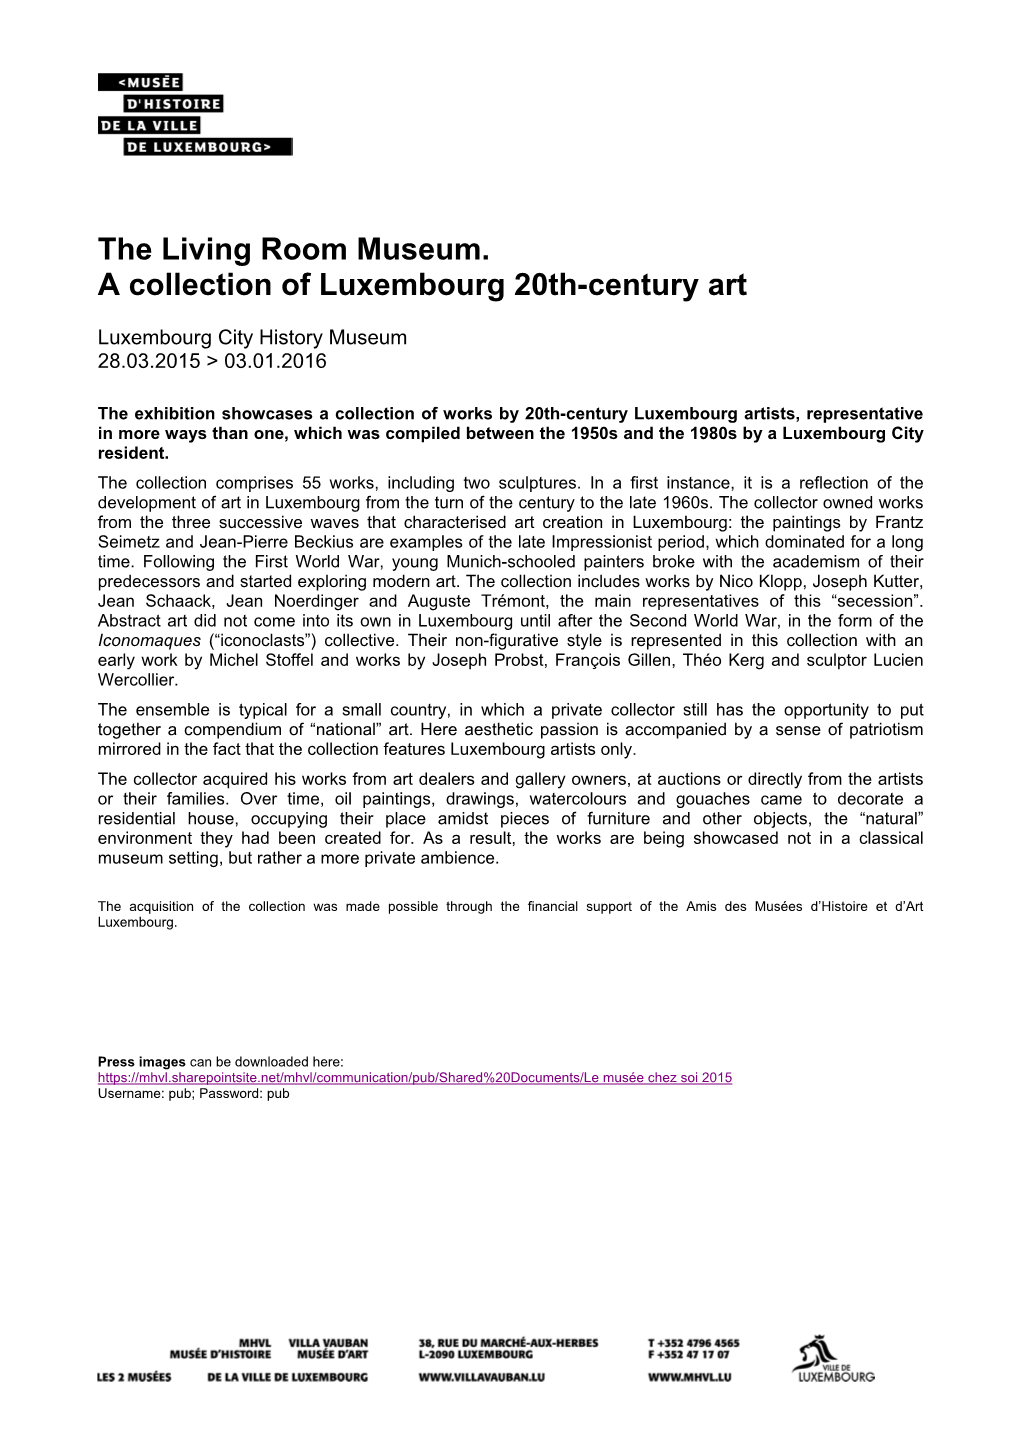 The Living Room Museum. a Collection of Luxembourg 20Th-Century Art